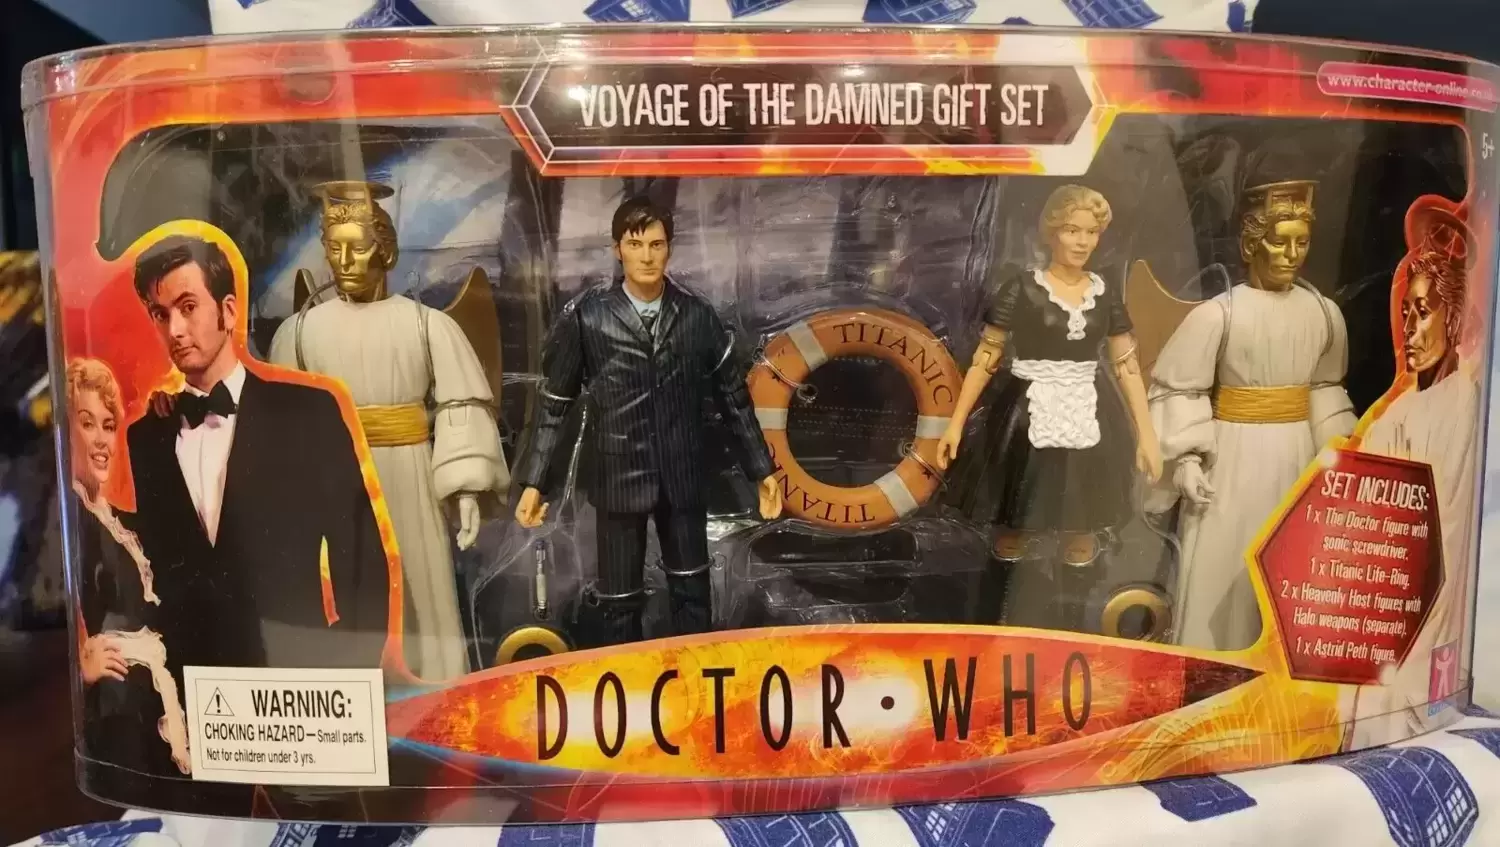 Action Figures - Voyage of the Damned Gift Set